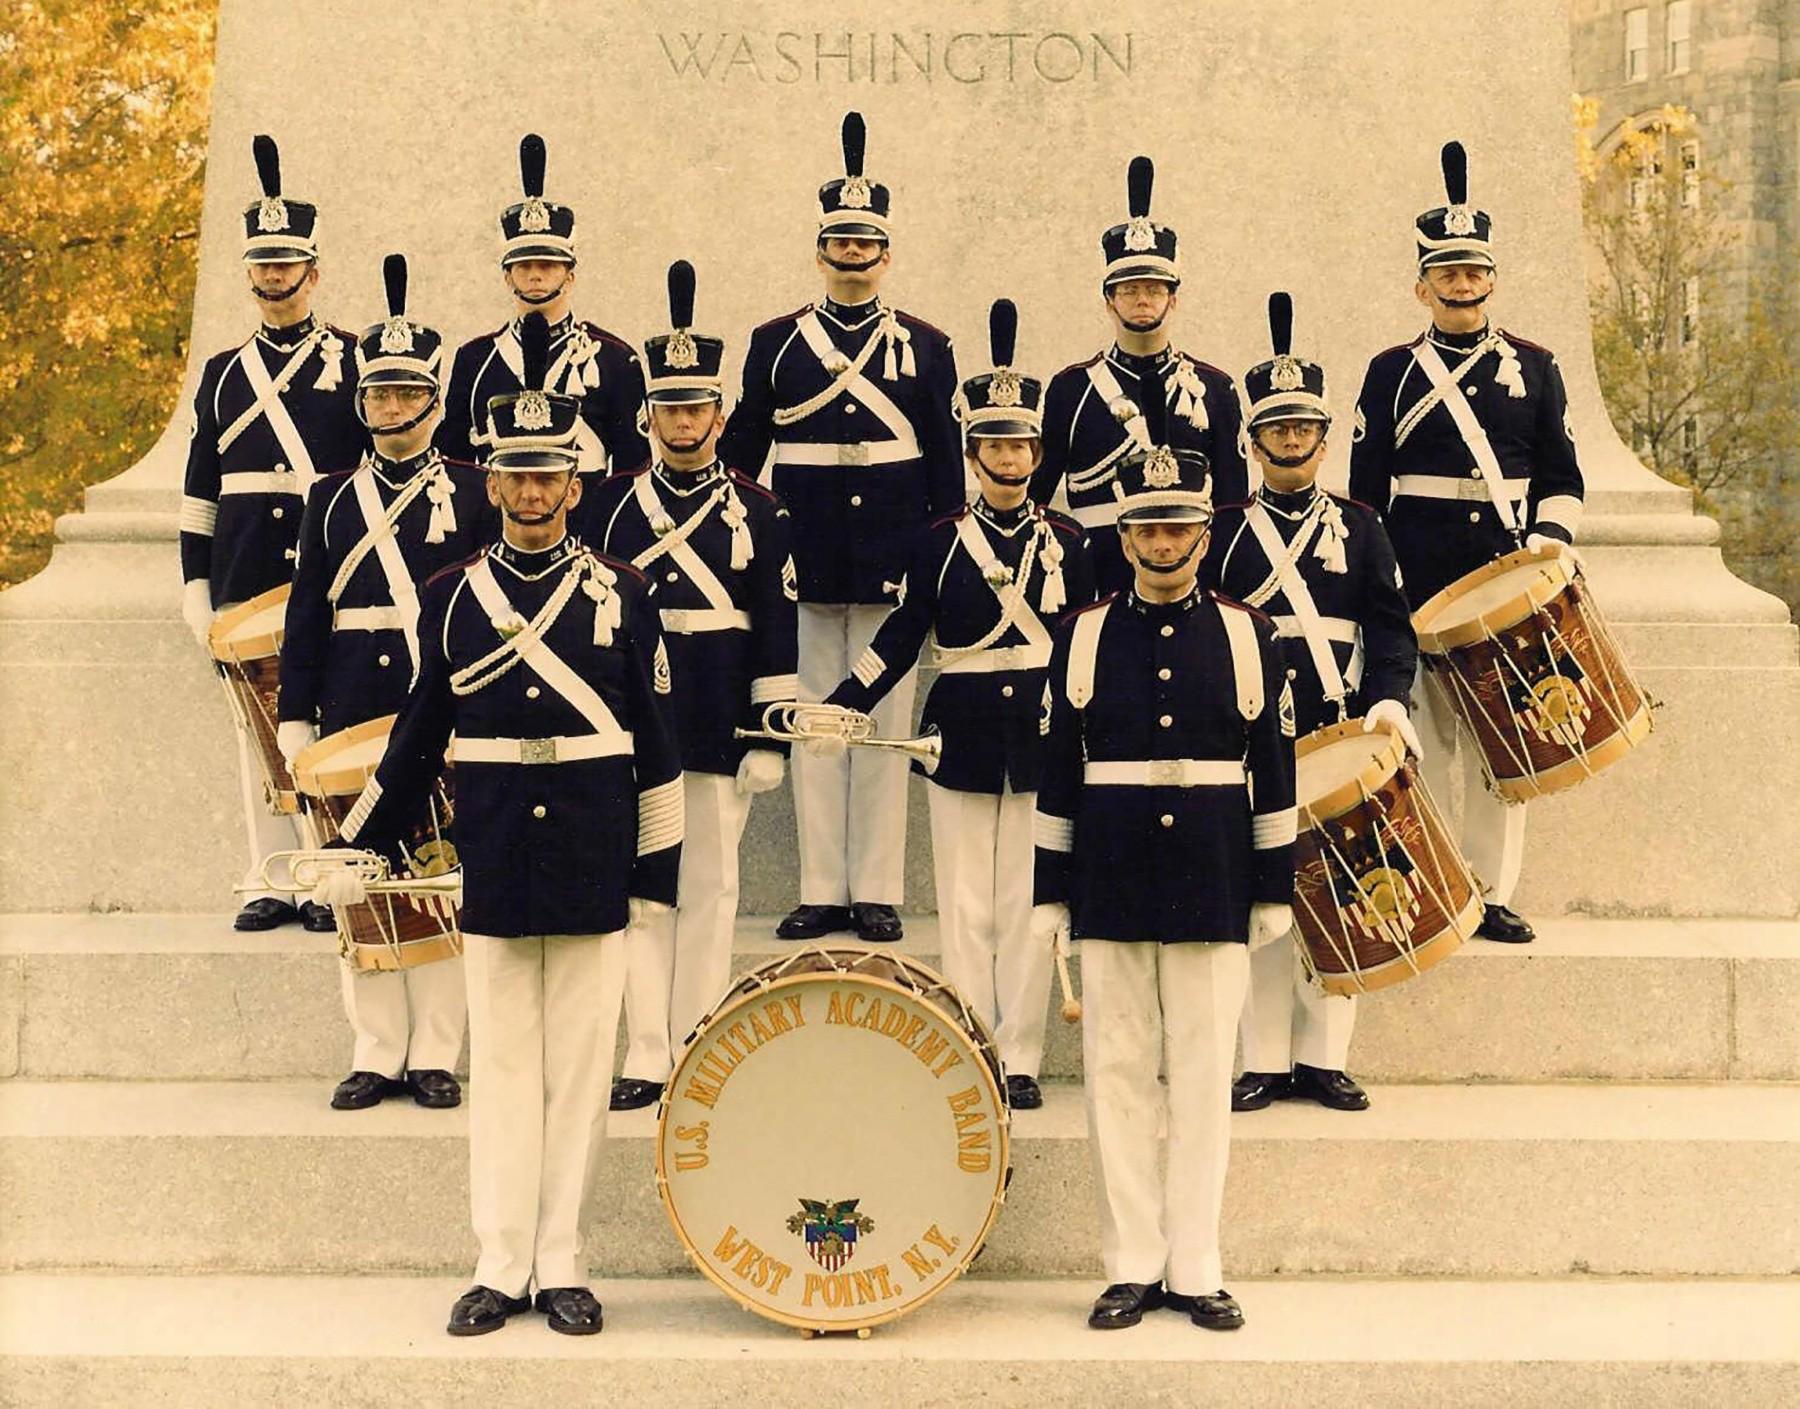 West Point Band